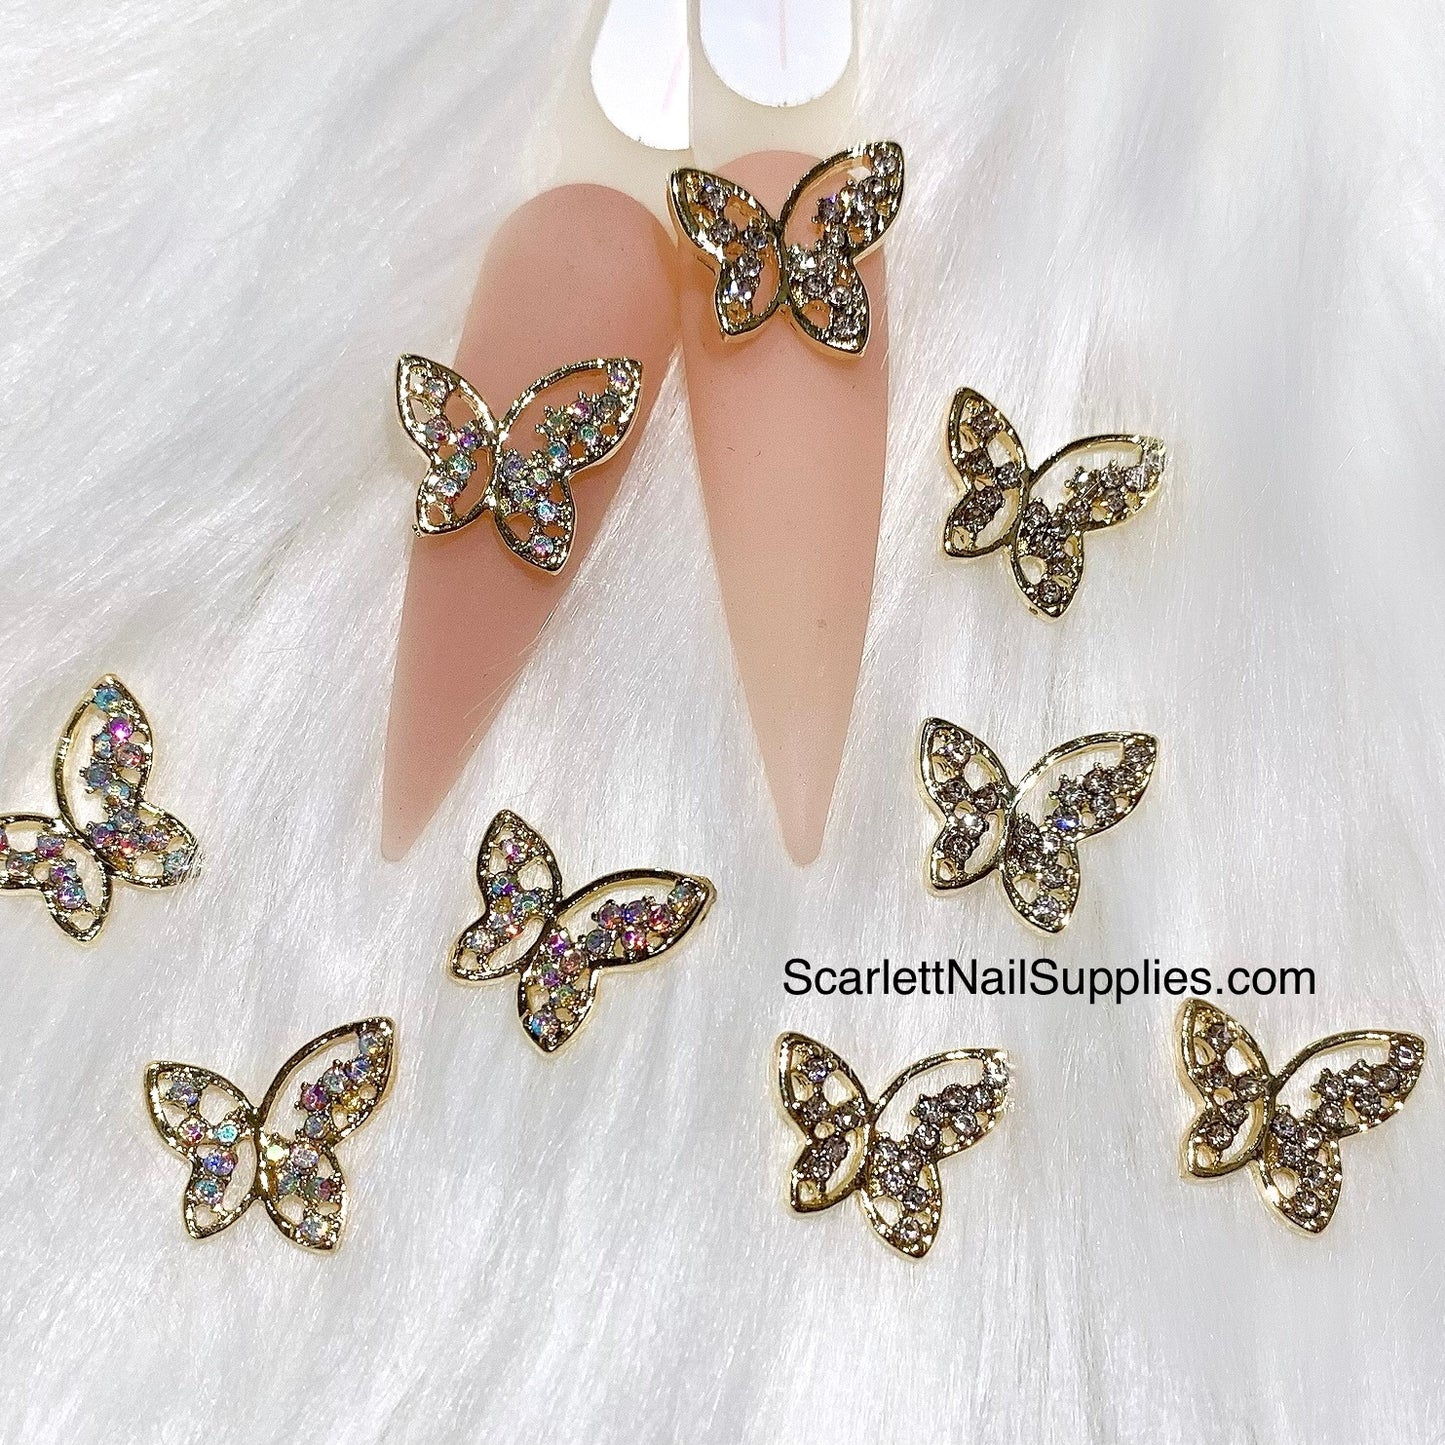 1 piece Butterfly Nail Charm - Metal Charm Nail Decorations